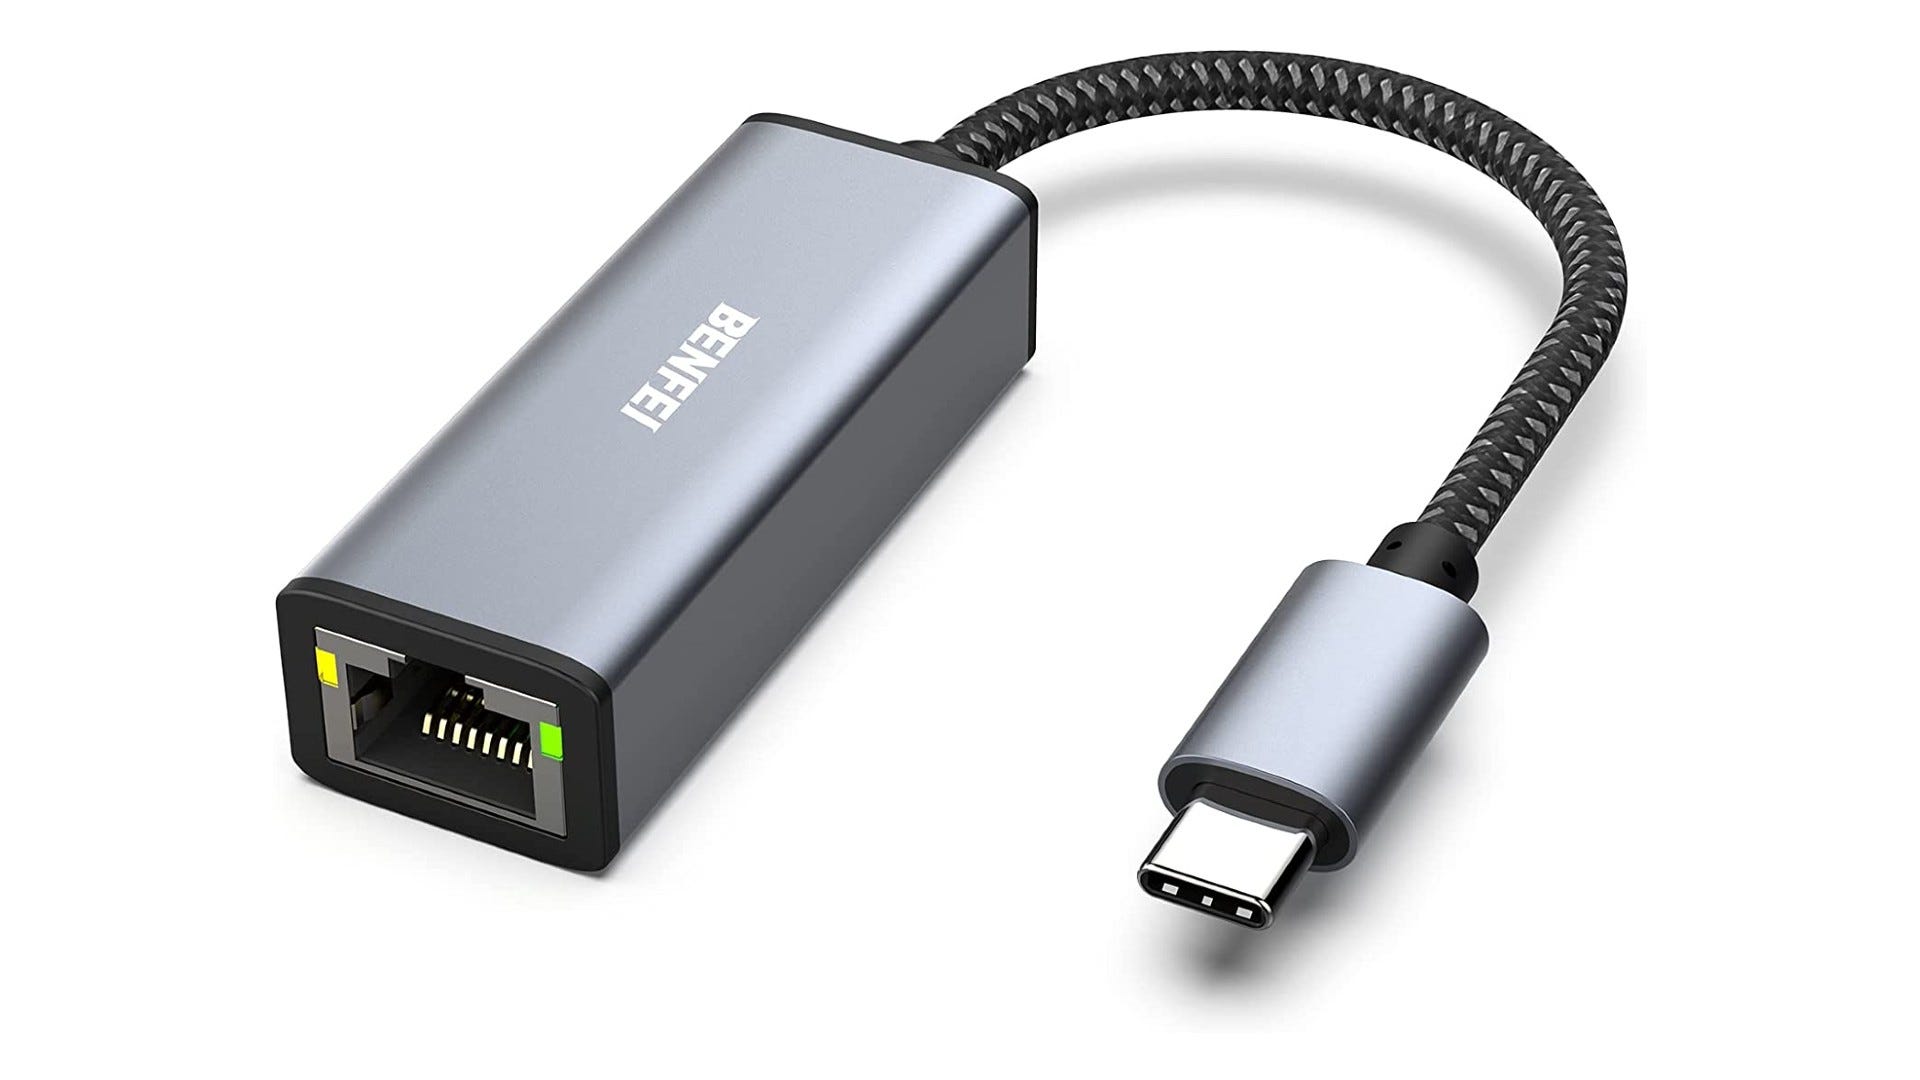 BENFEI 000269grey USB-C to Ethernet Adapter on white background